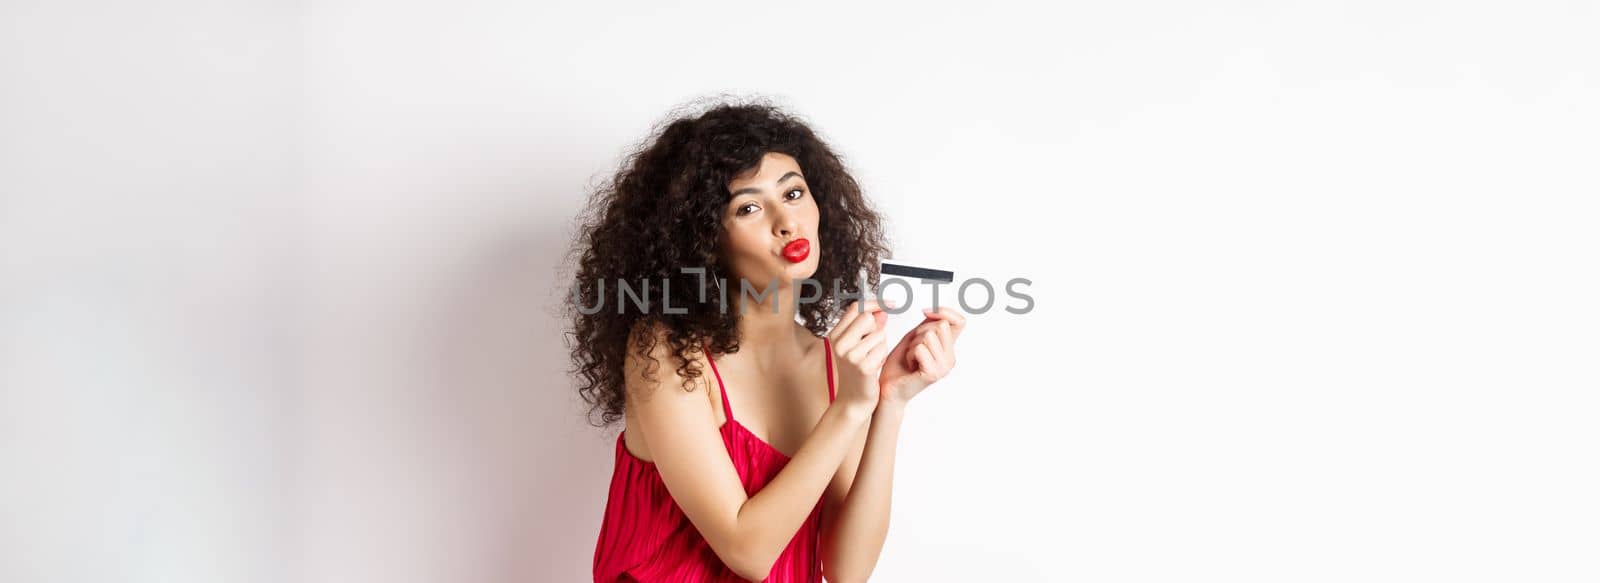 Shopping. Beautiful lady with curly hair, pucker lips, kissing plastic credit card, standing in red dress against white background by Benzoix